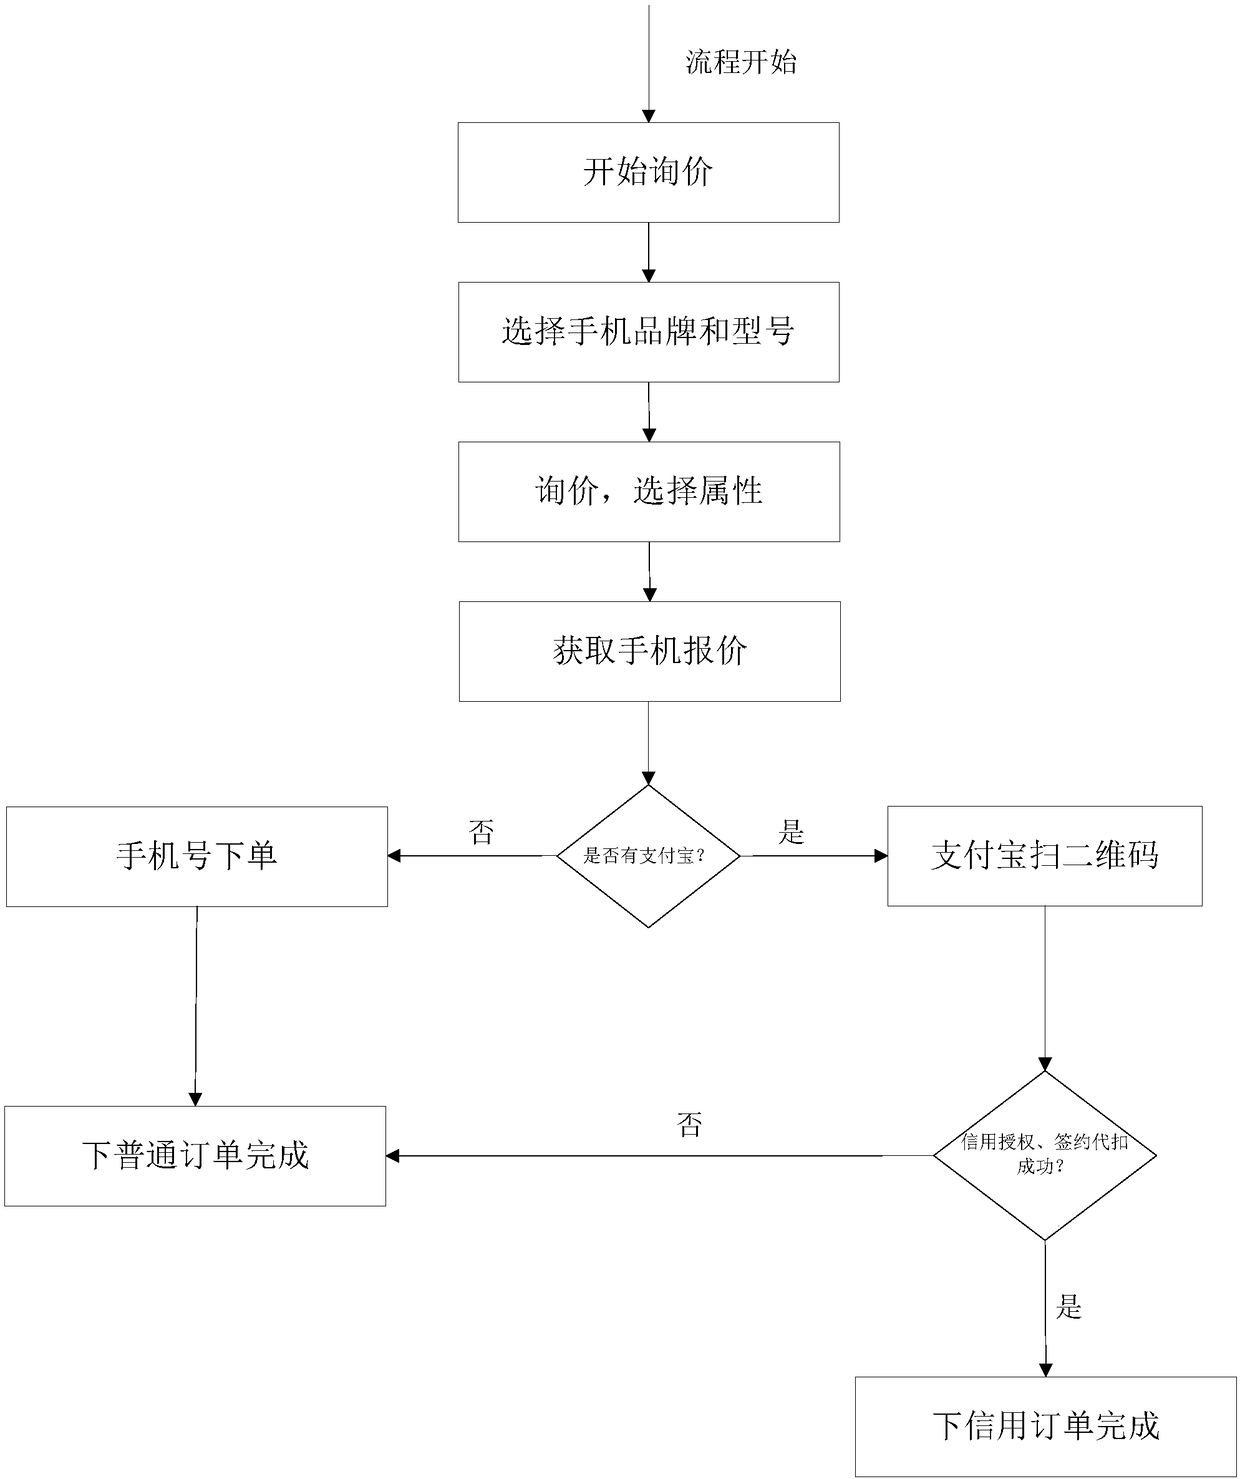 Mobile phone self-service recycle method and mobile phone self-service recycle system